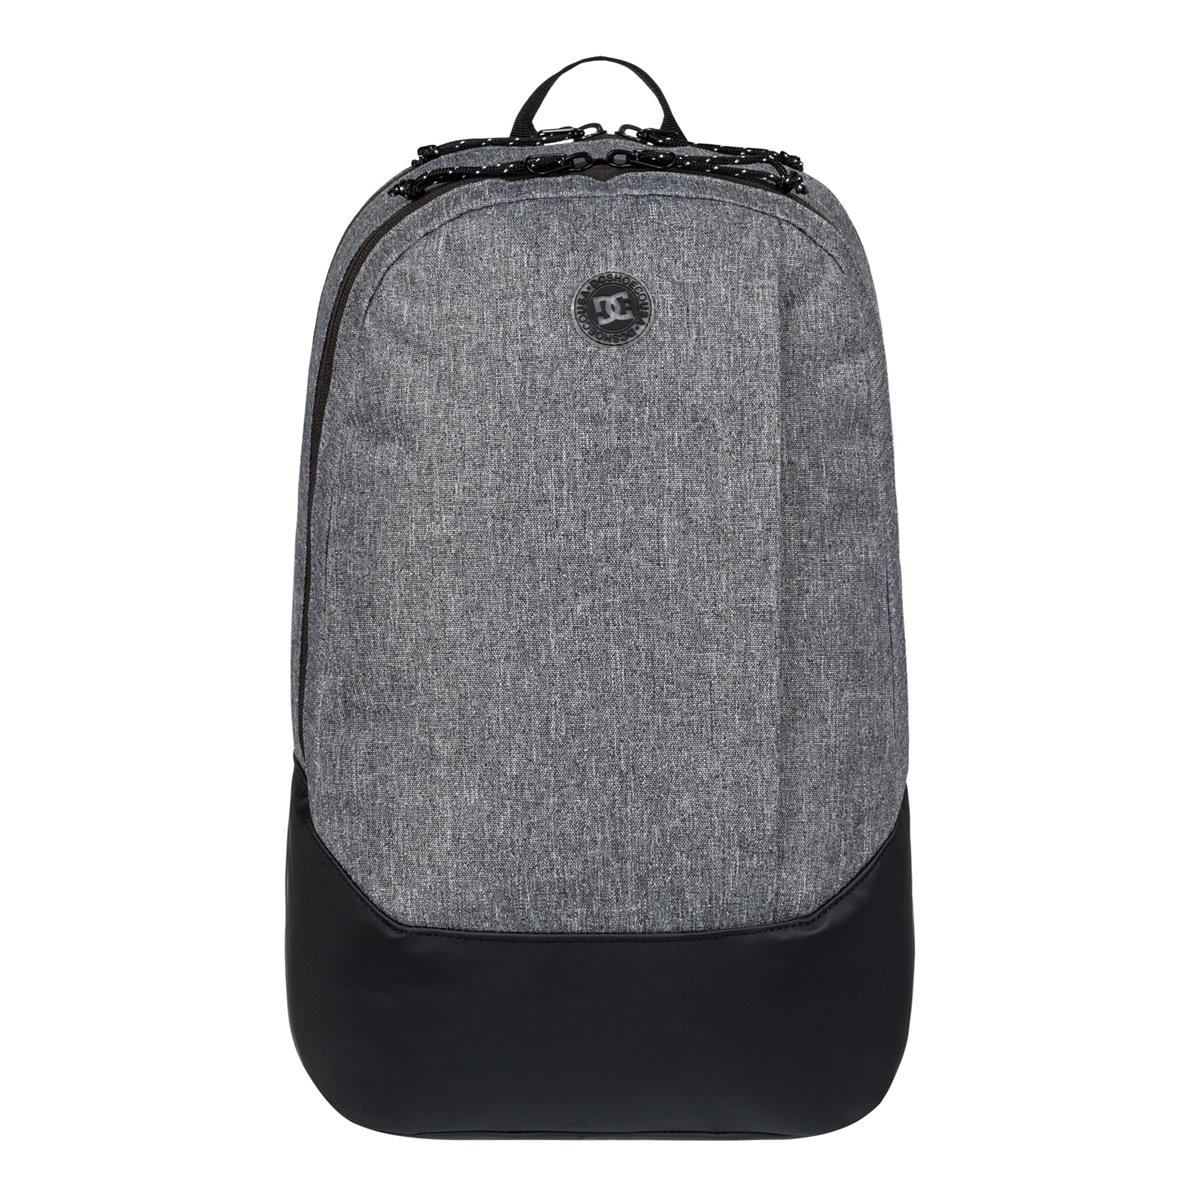 DC Backpack Punchyard Charcoal Heather